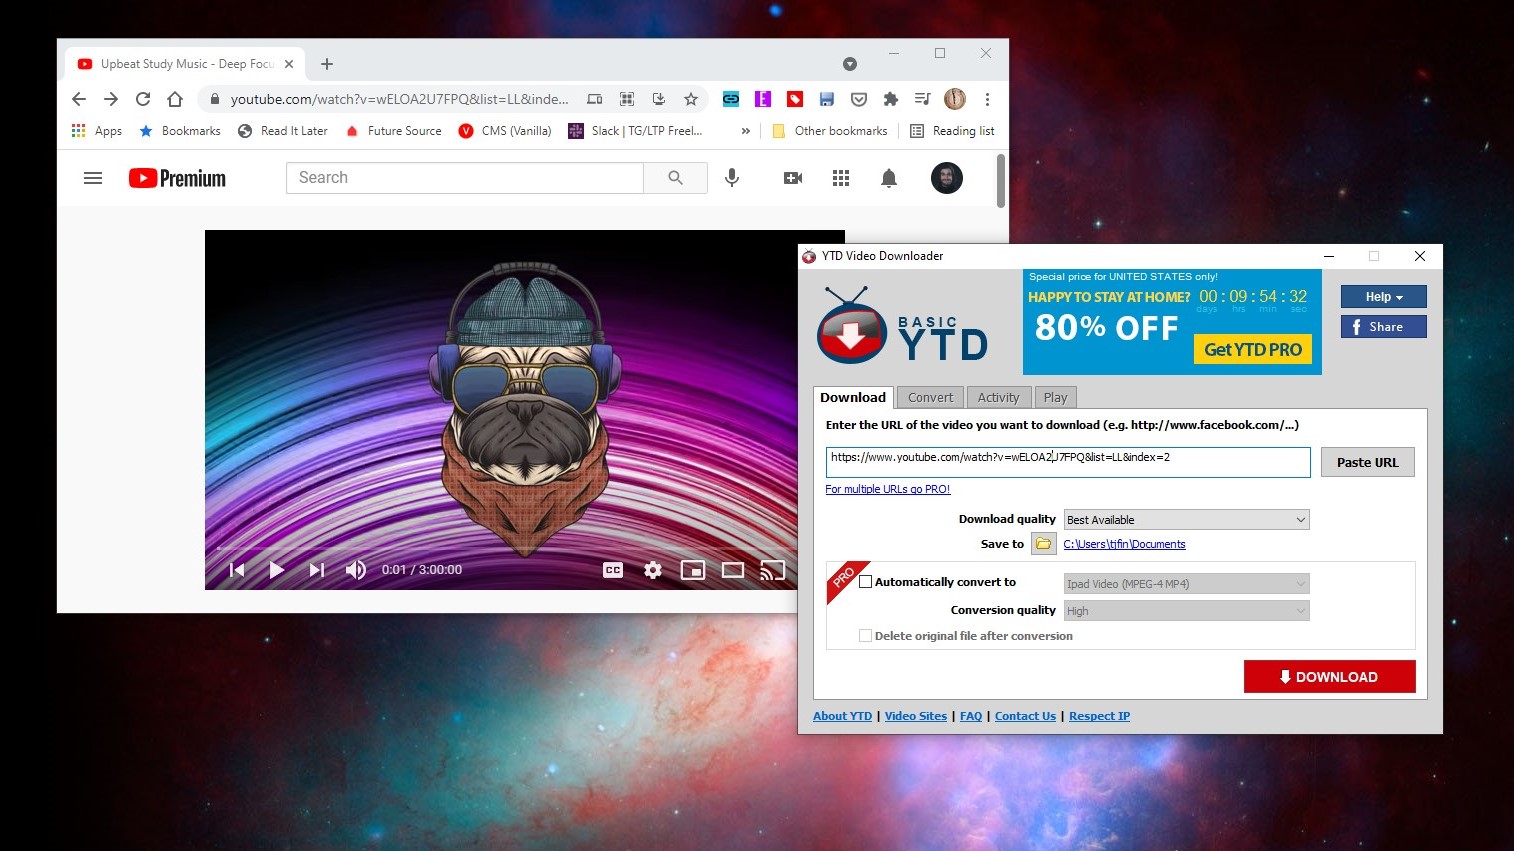 How to Download YouTube Videos on Your PC | Laptop Mag